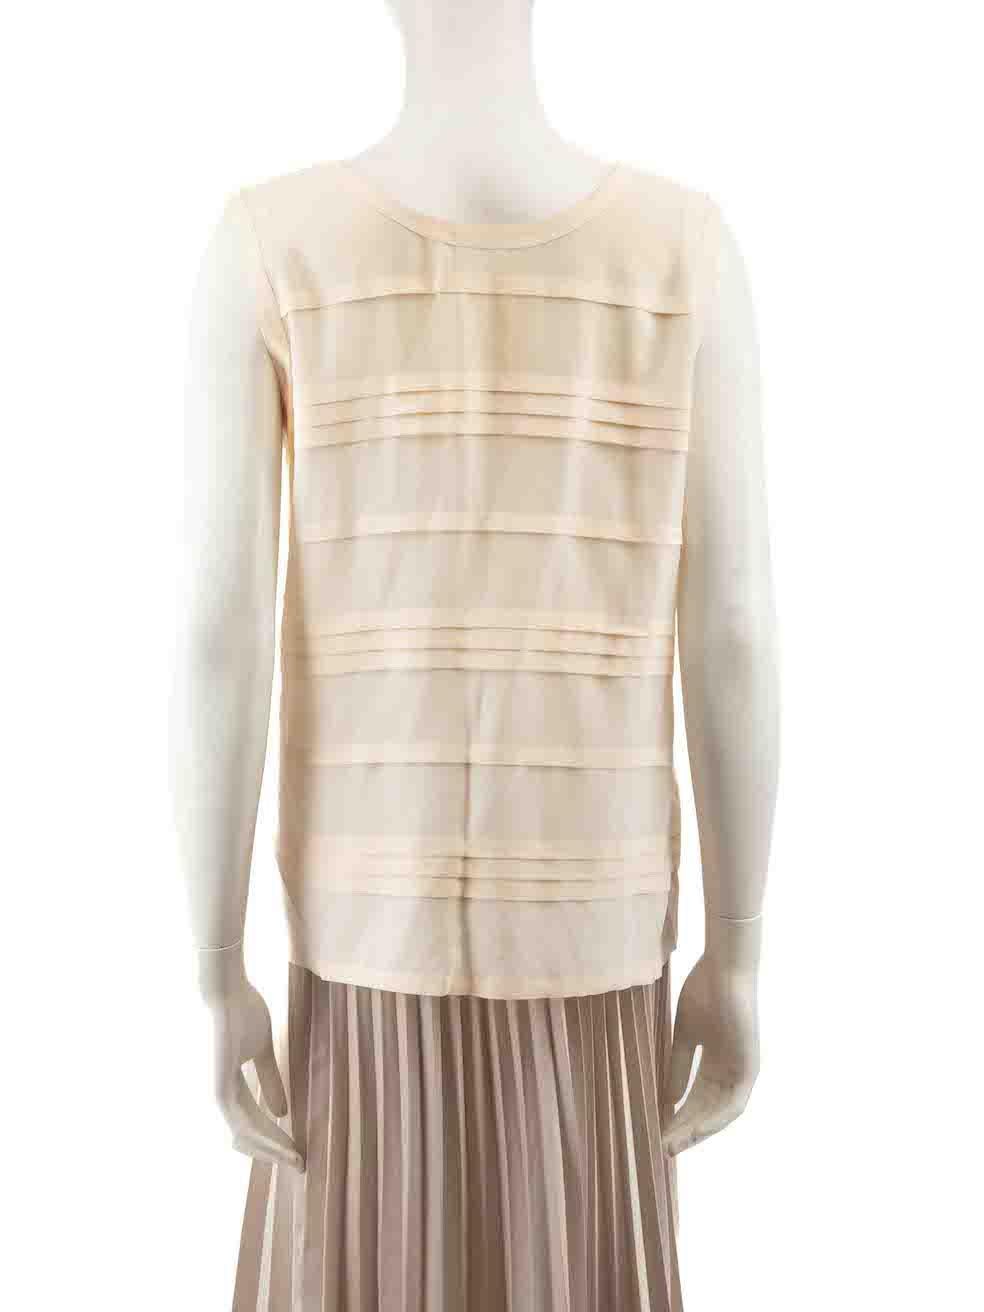 Céline Vintage Ecru Round Neck Sleeveless Top Size M In Good Condition For Sale In London, GB